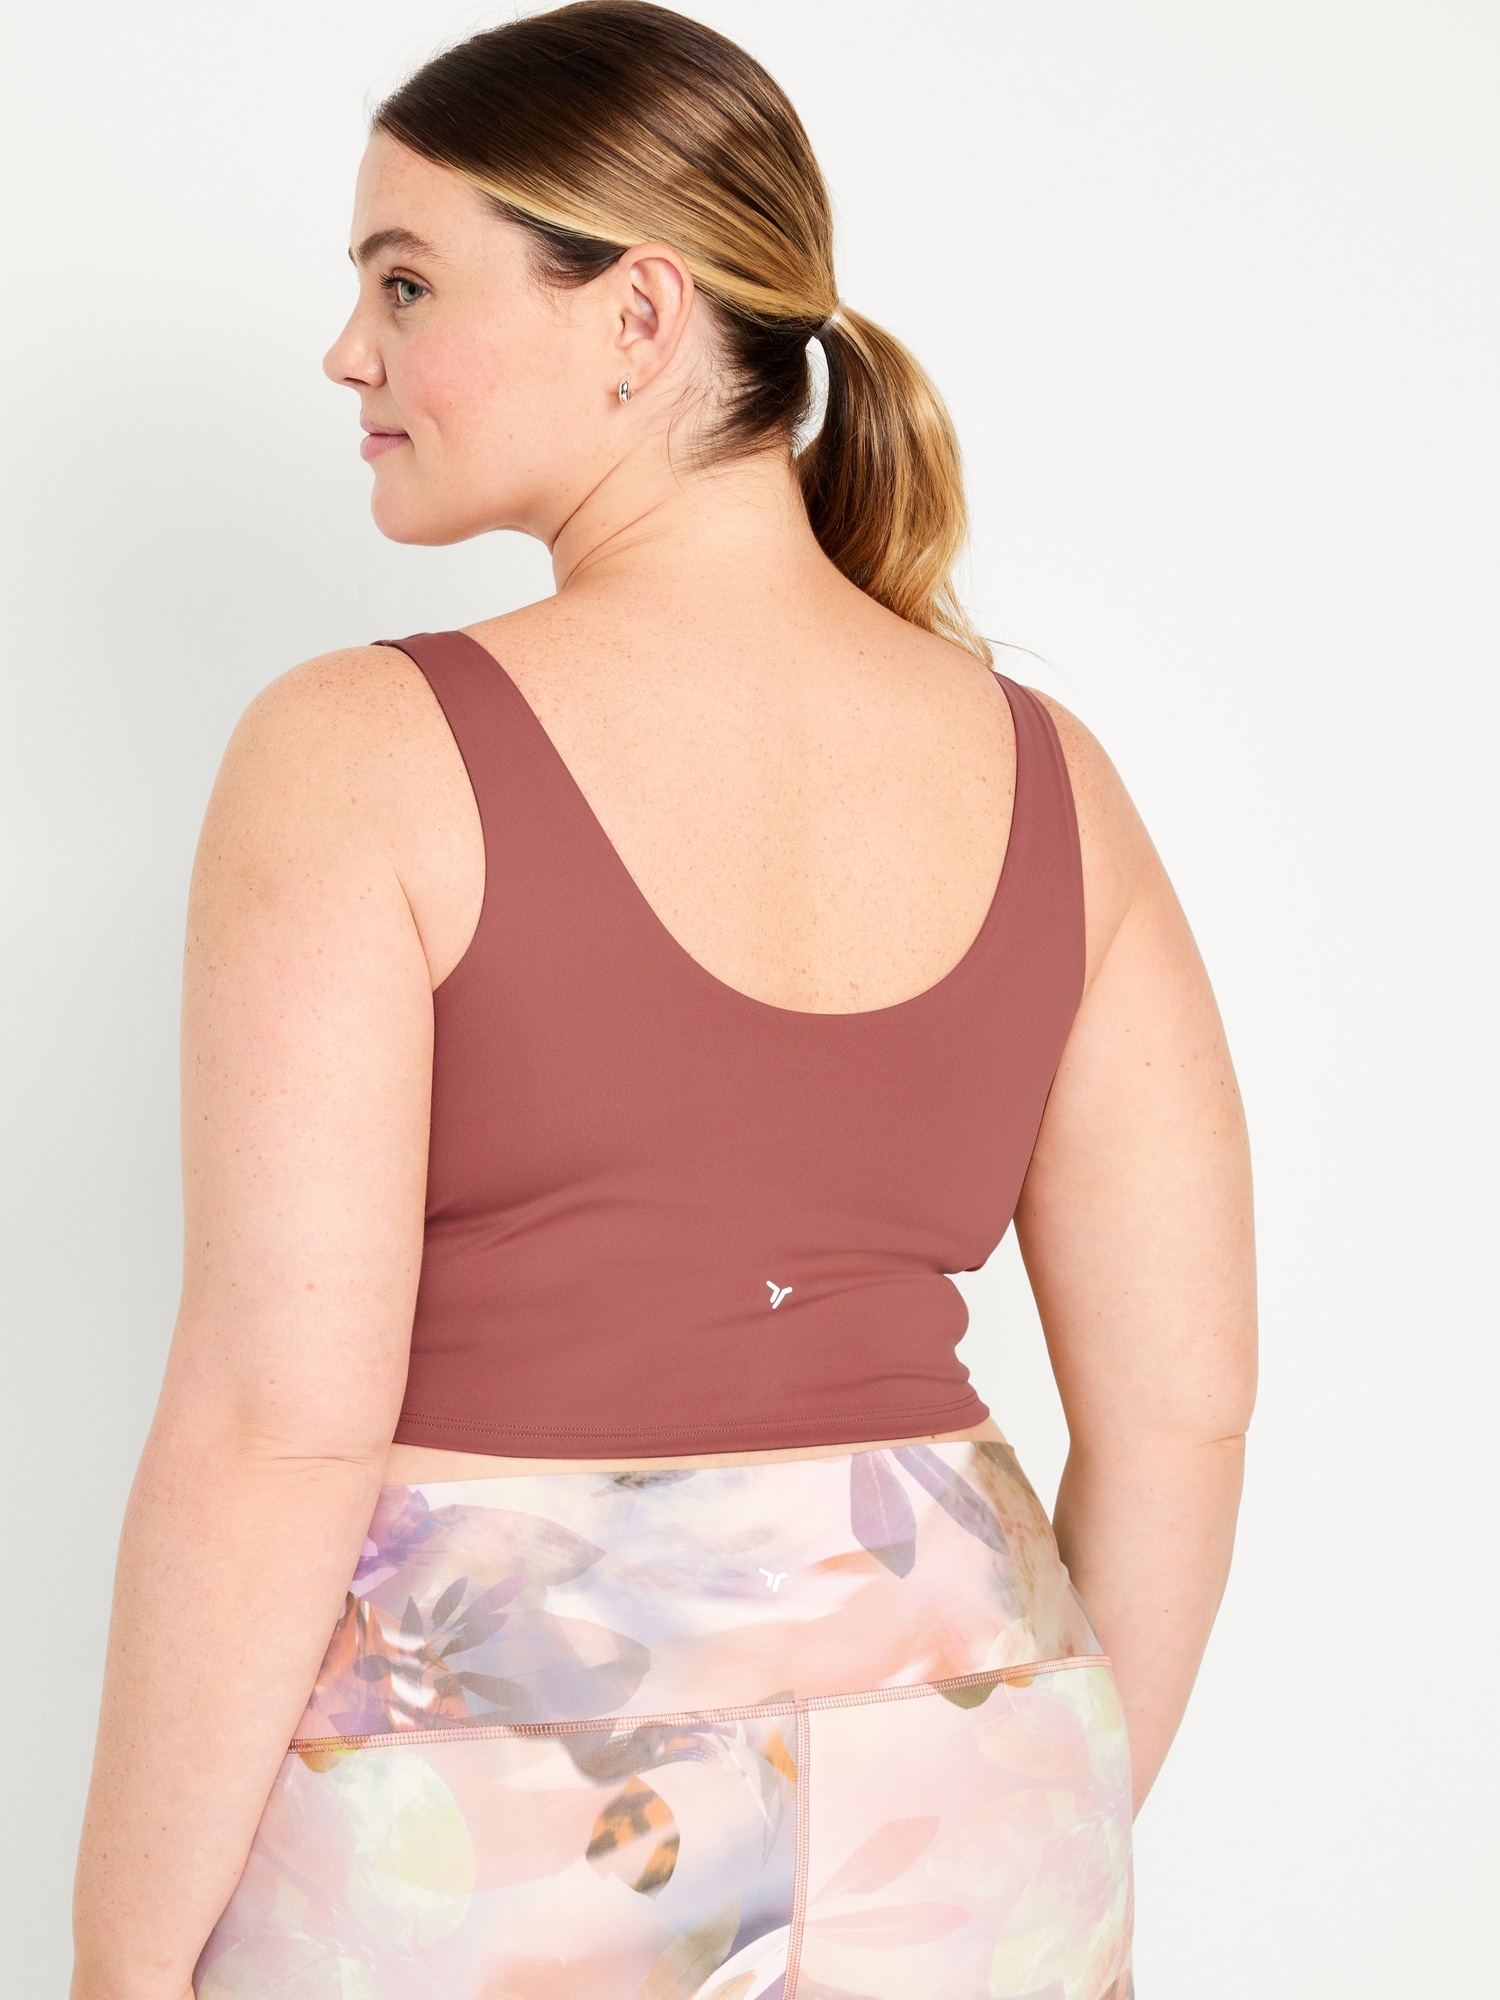 Old Navy Molded Sports Bras for Women